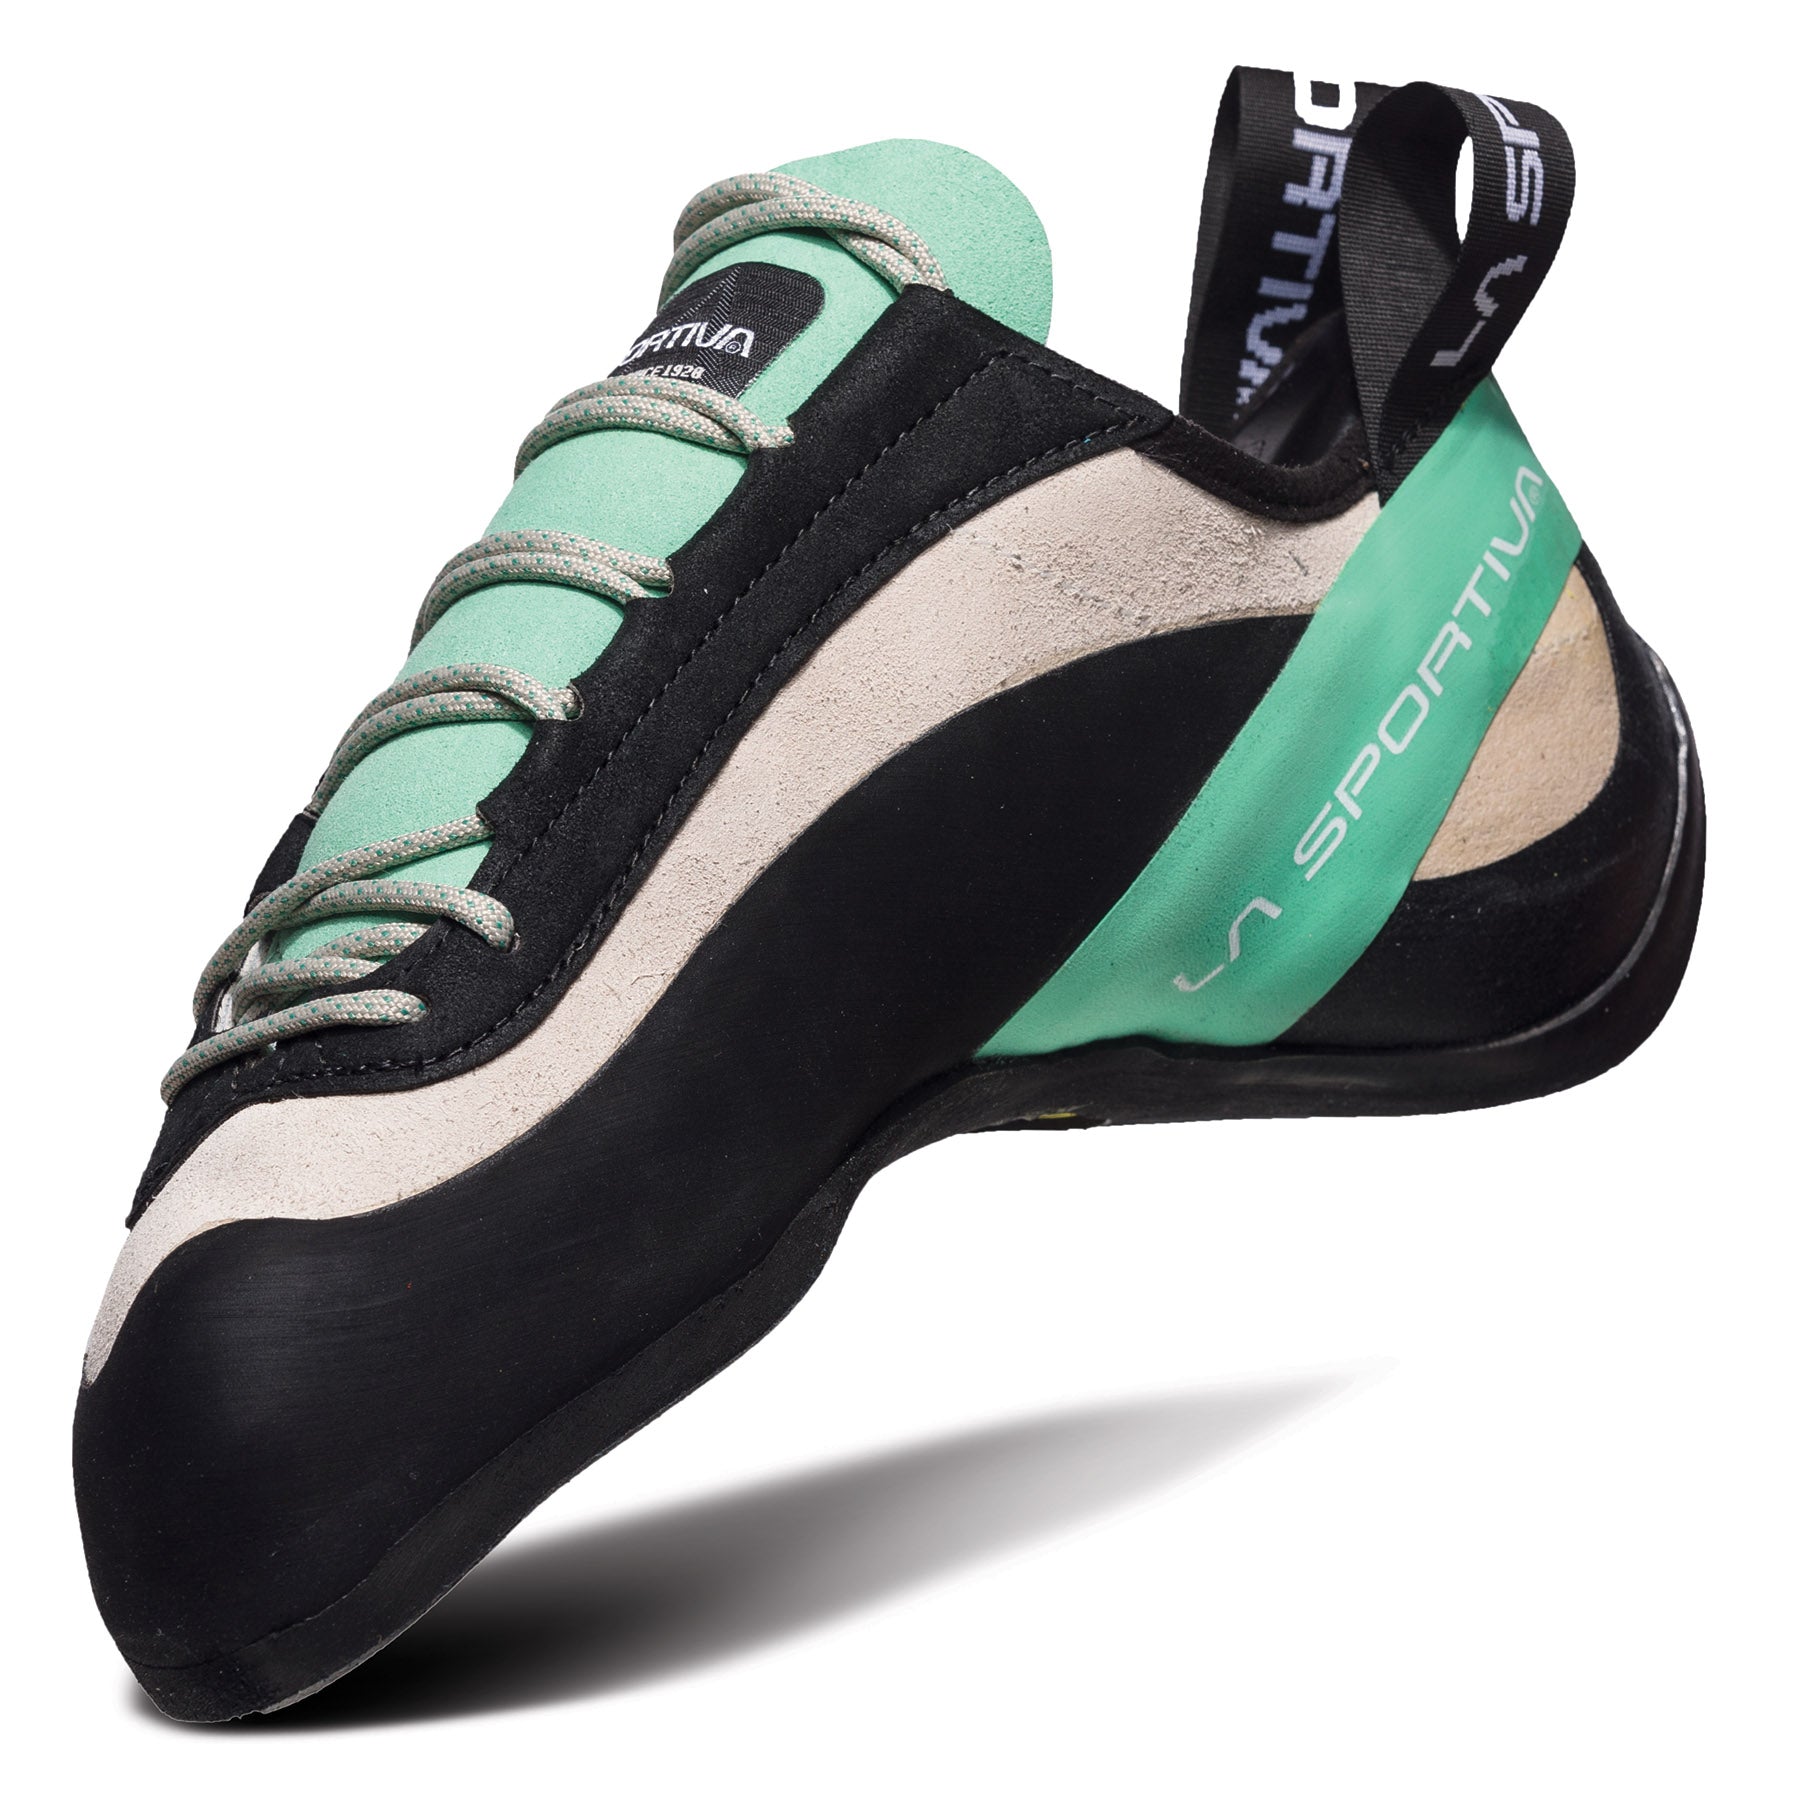 la sportiva womens' miura lace-up climbing shoes, inside side view